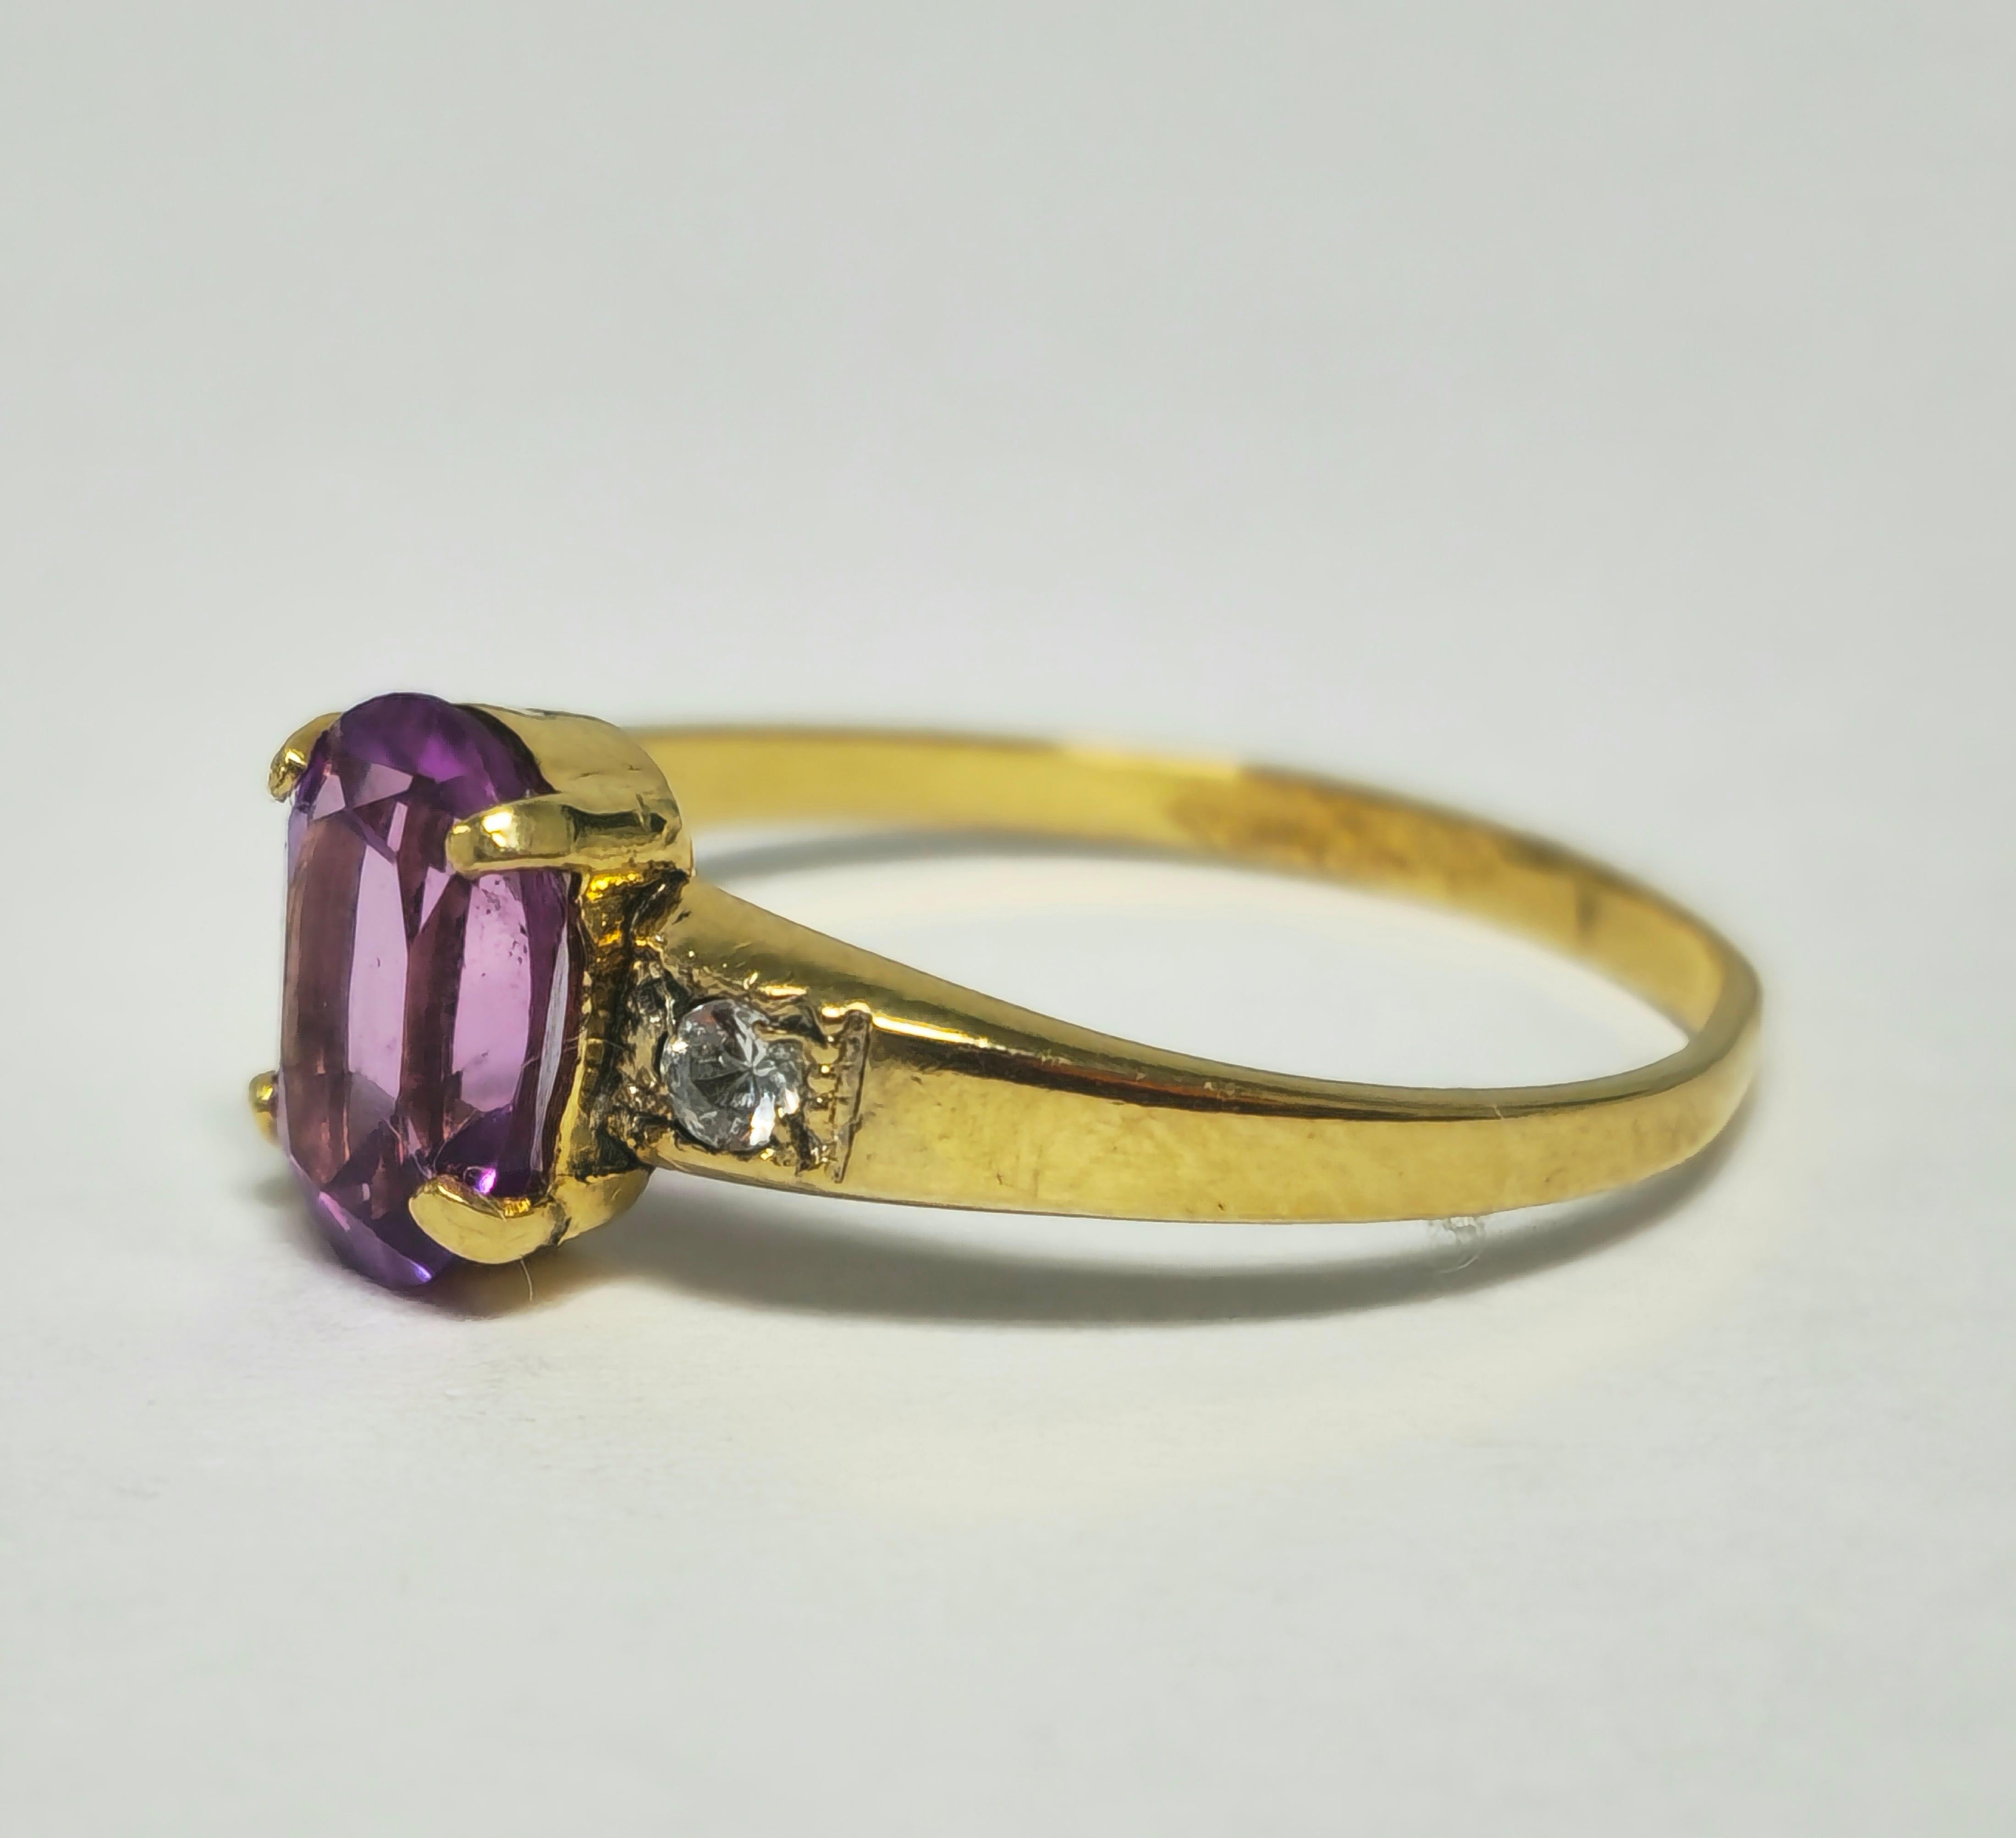 Fashioned in 10K yellow gold, this captivating ring boasts a centerpiece of a 0.95-carat pink sapphire, its natural elegance accentuated by its oval shape. Surrounding it are diamonds totaling 0.12 carats, with SI2 clarity and G color, adding a